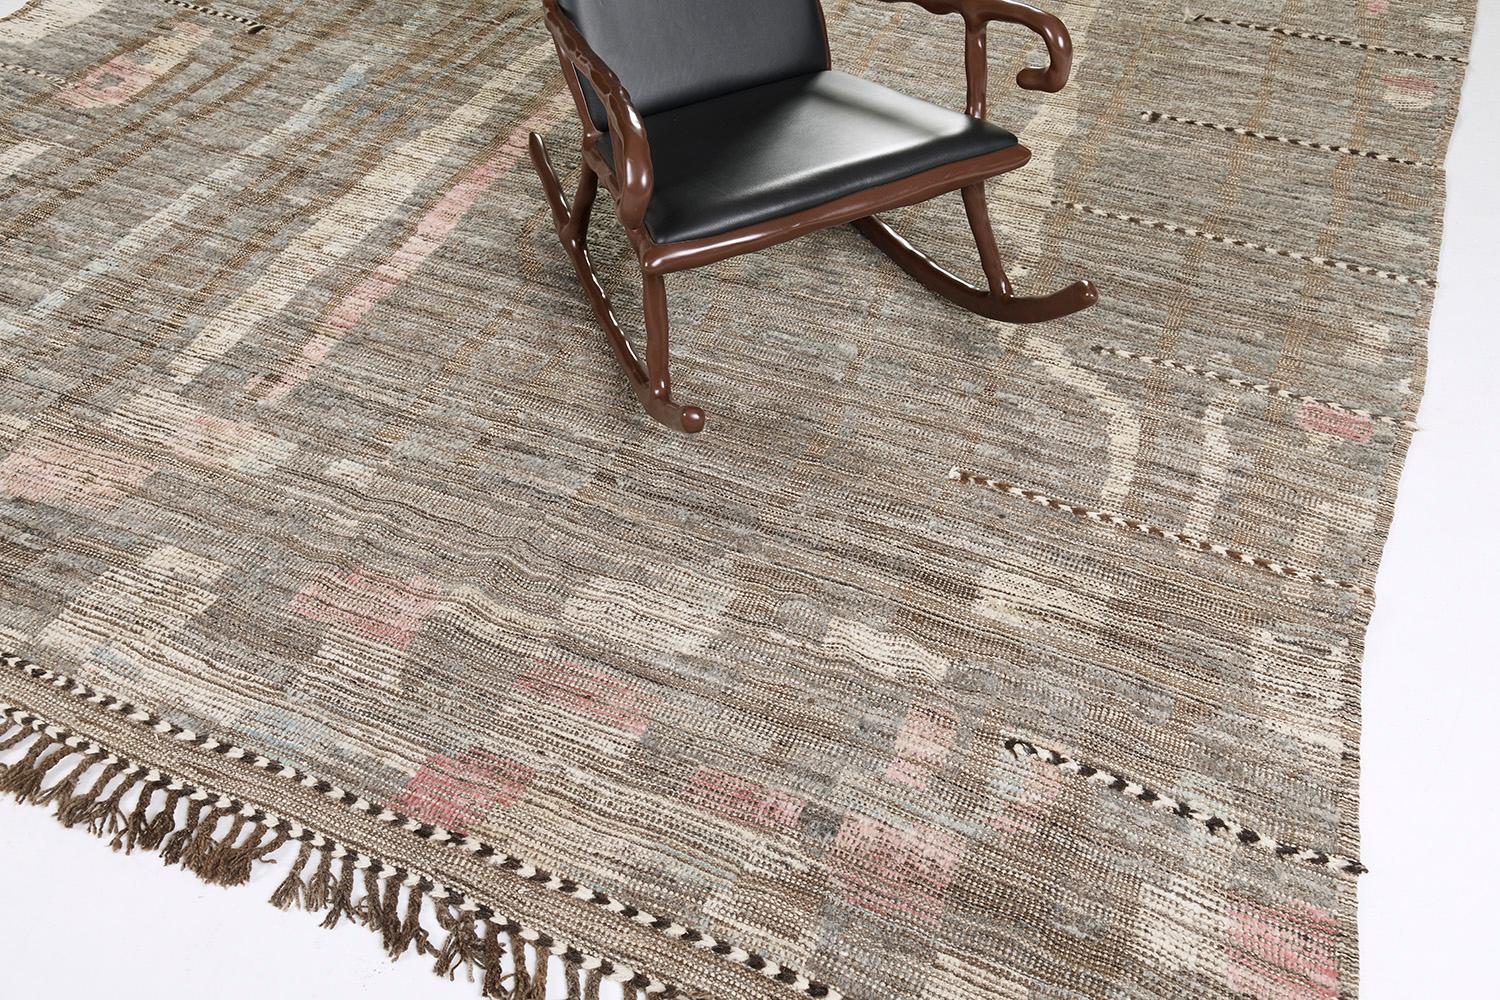 Berberis' is an interplay between natural earth tones and earthy colors into a modern day interpretation of the Moroccan world. This rug's play of textures, linework, and unique shapes is what makes the Atlas Collection so unique and sought after.